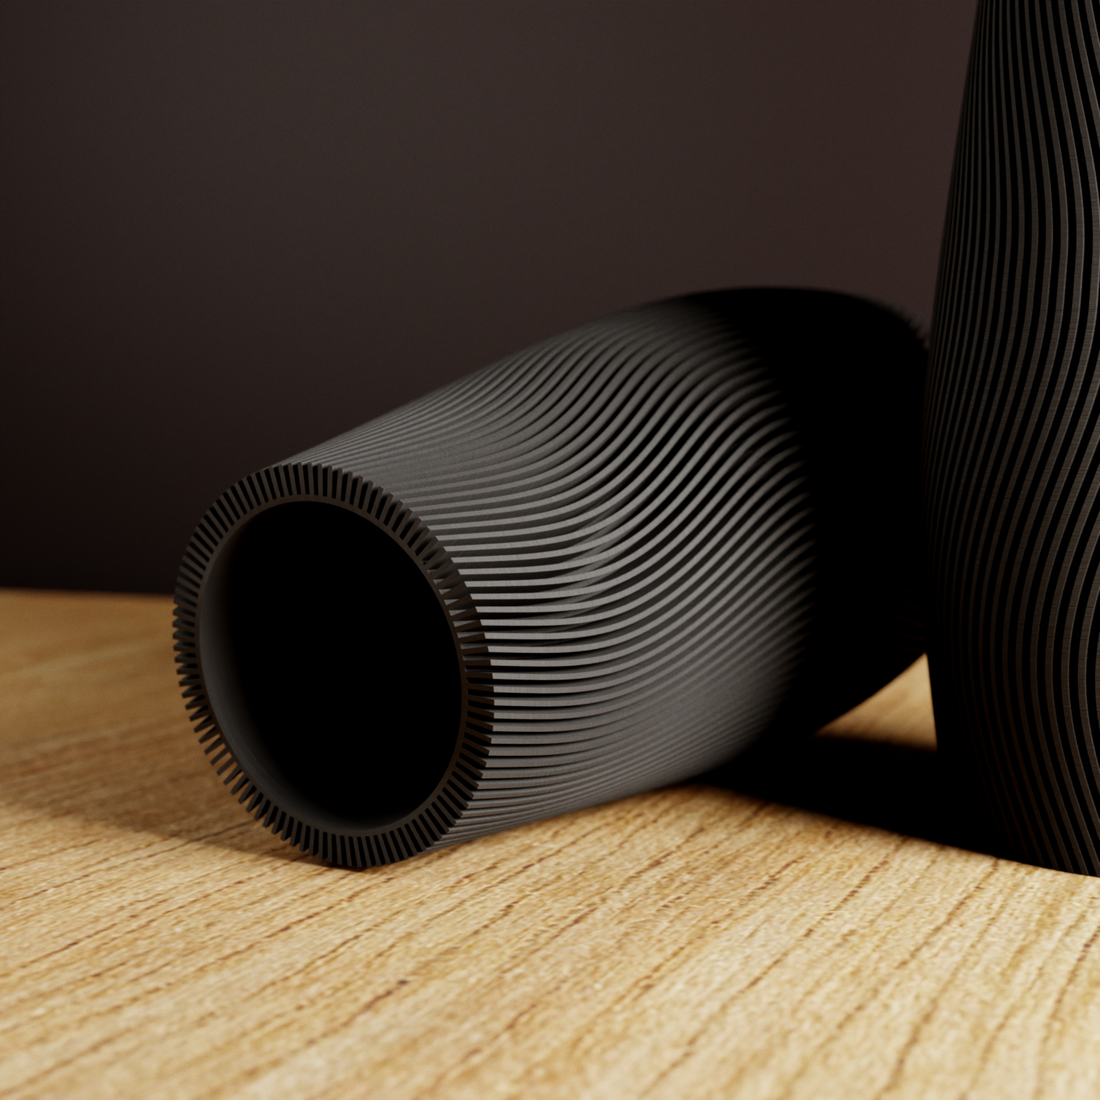 3D Printed Midnight Black 'TIDAL' Vase for Dried Flowers